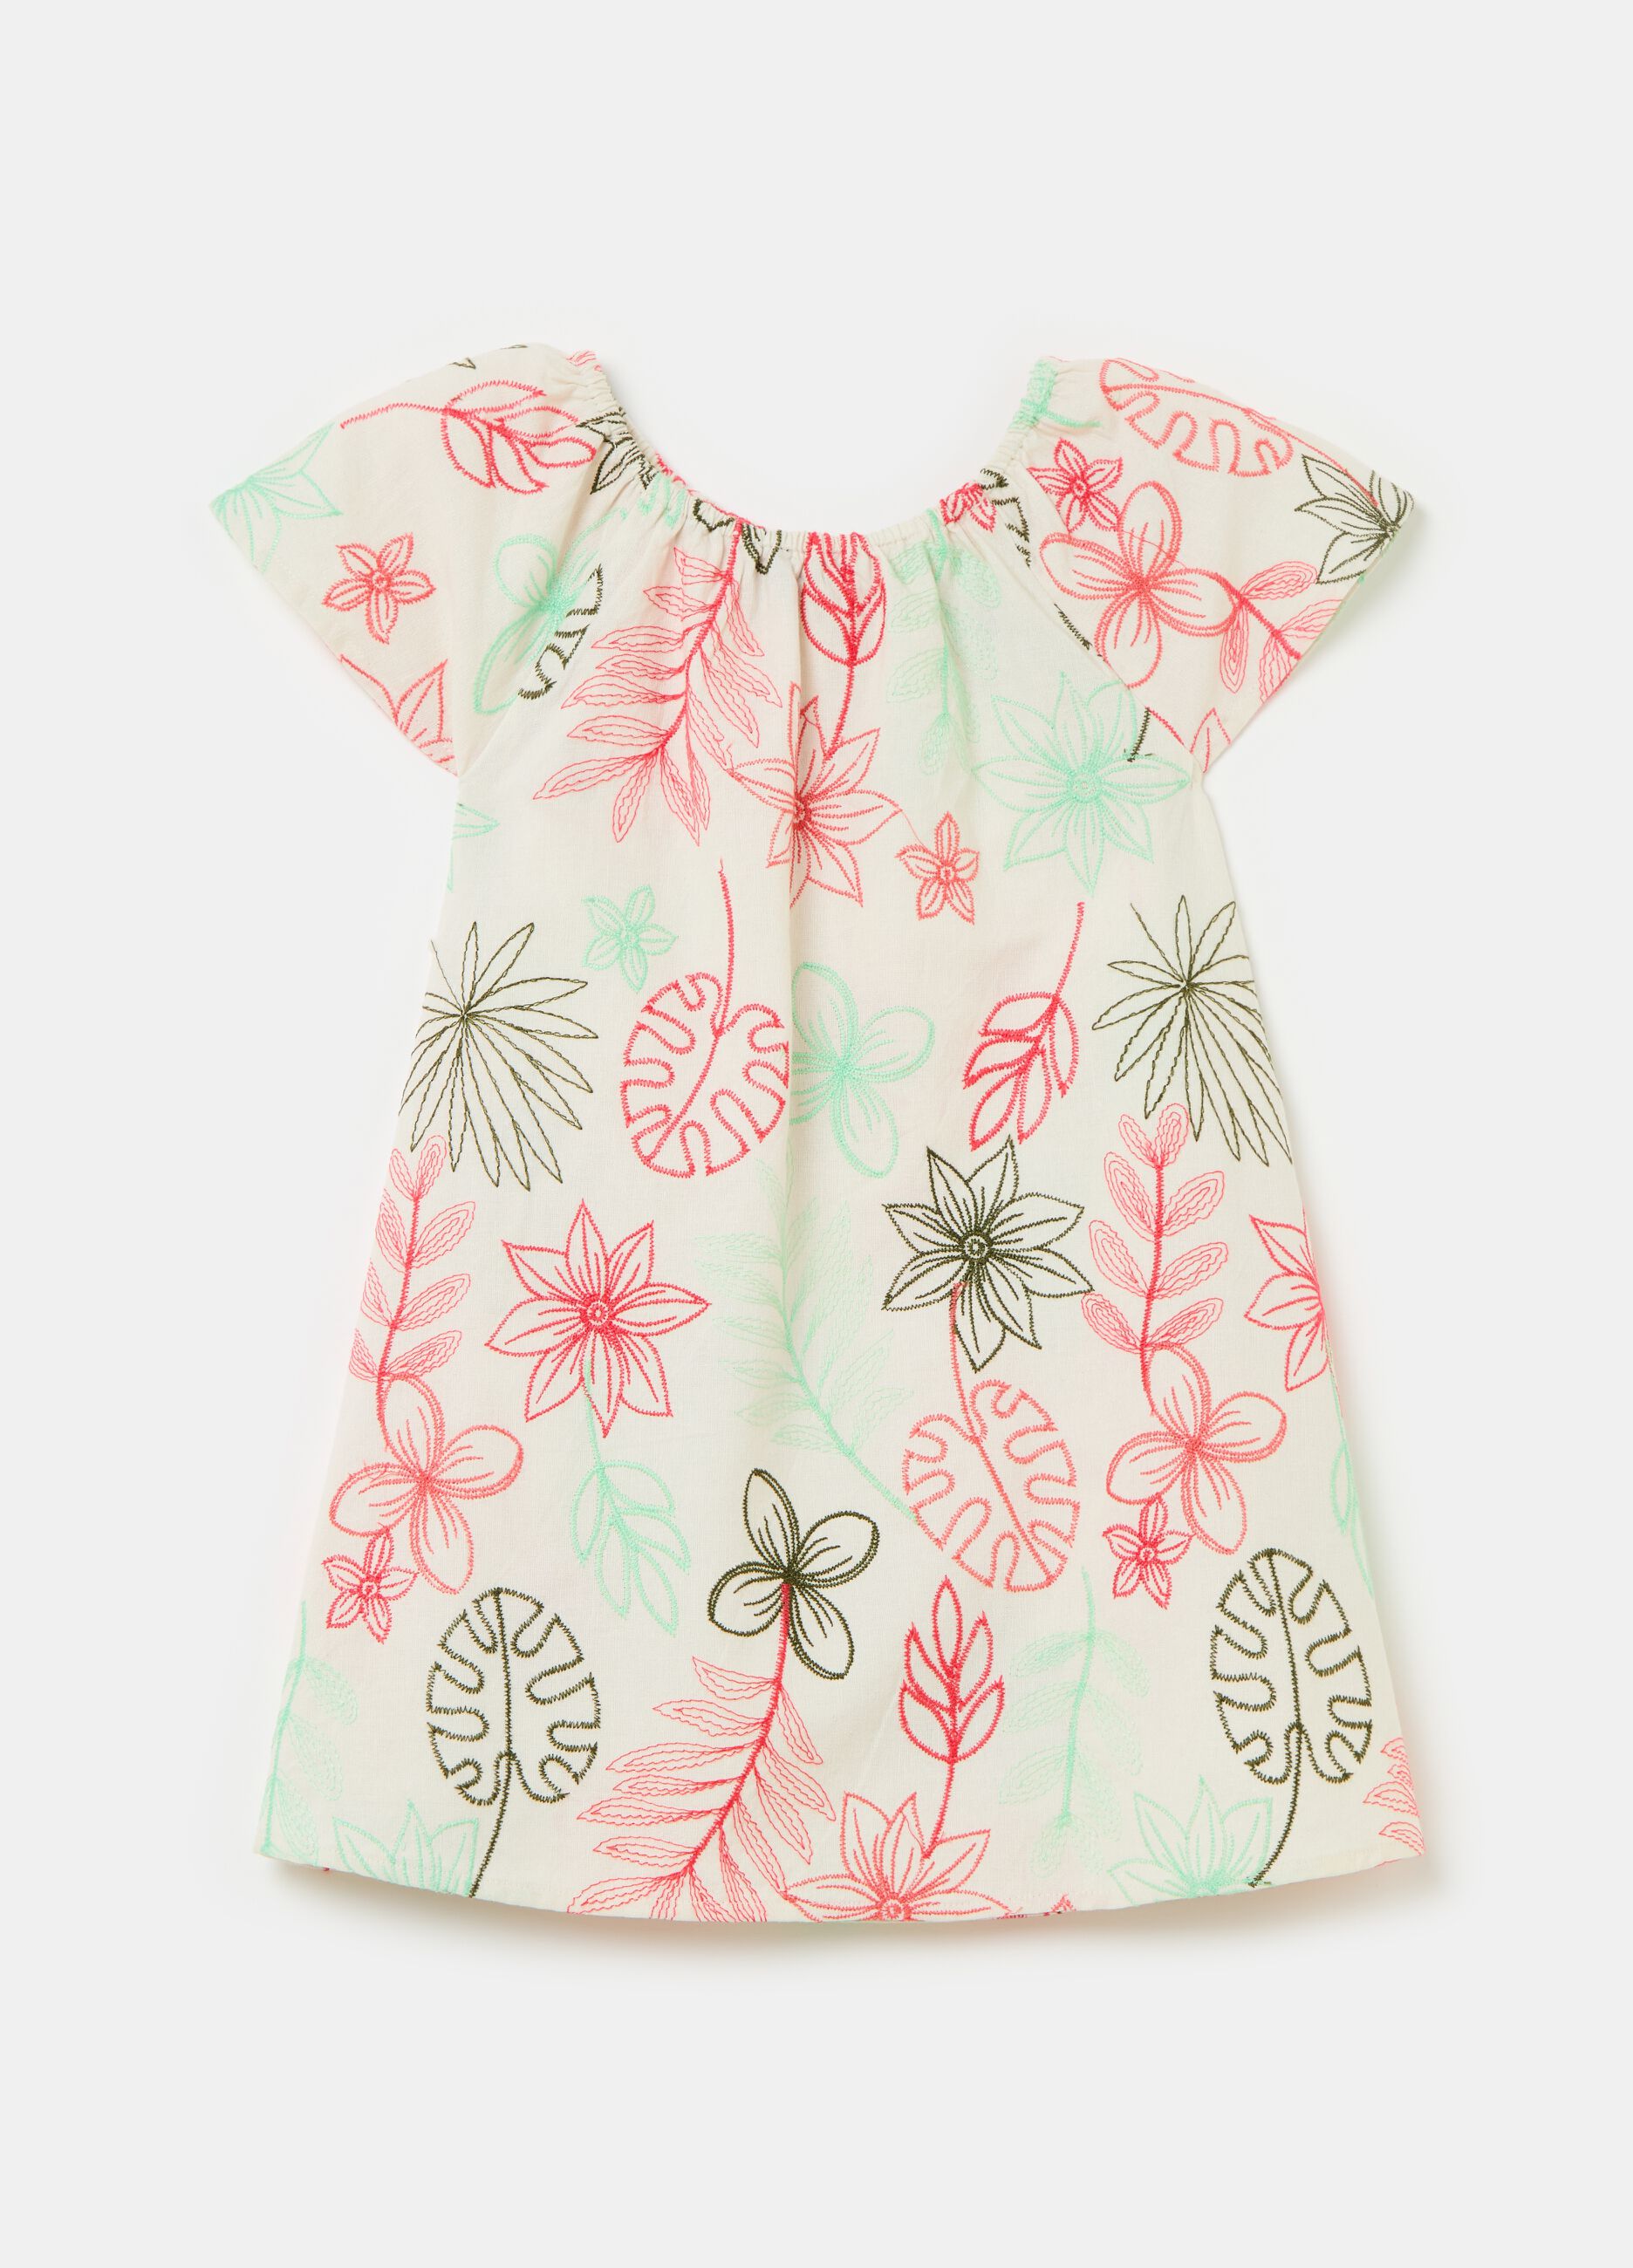 Cotton and linen dress with floral embroidery